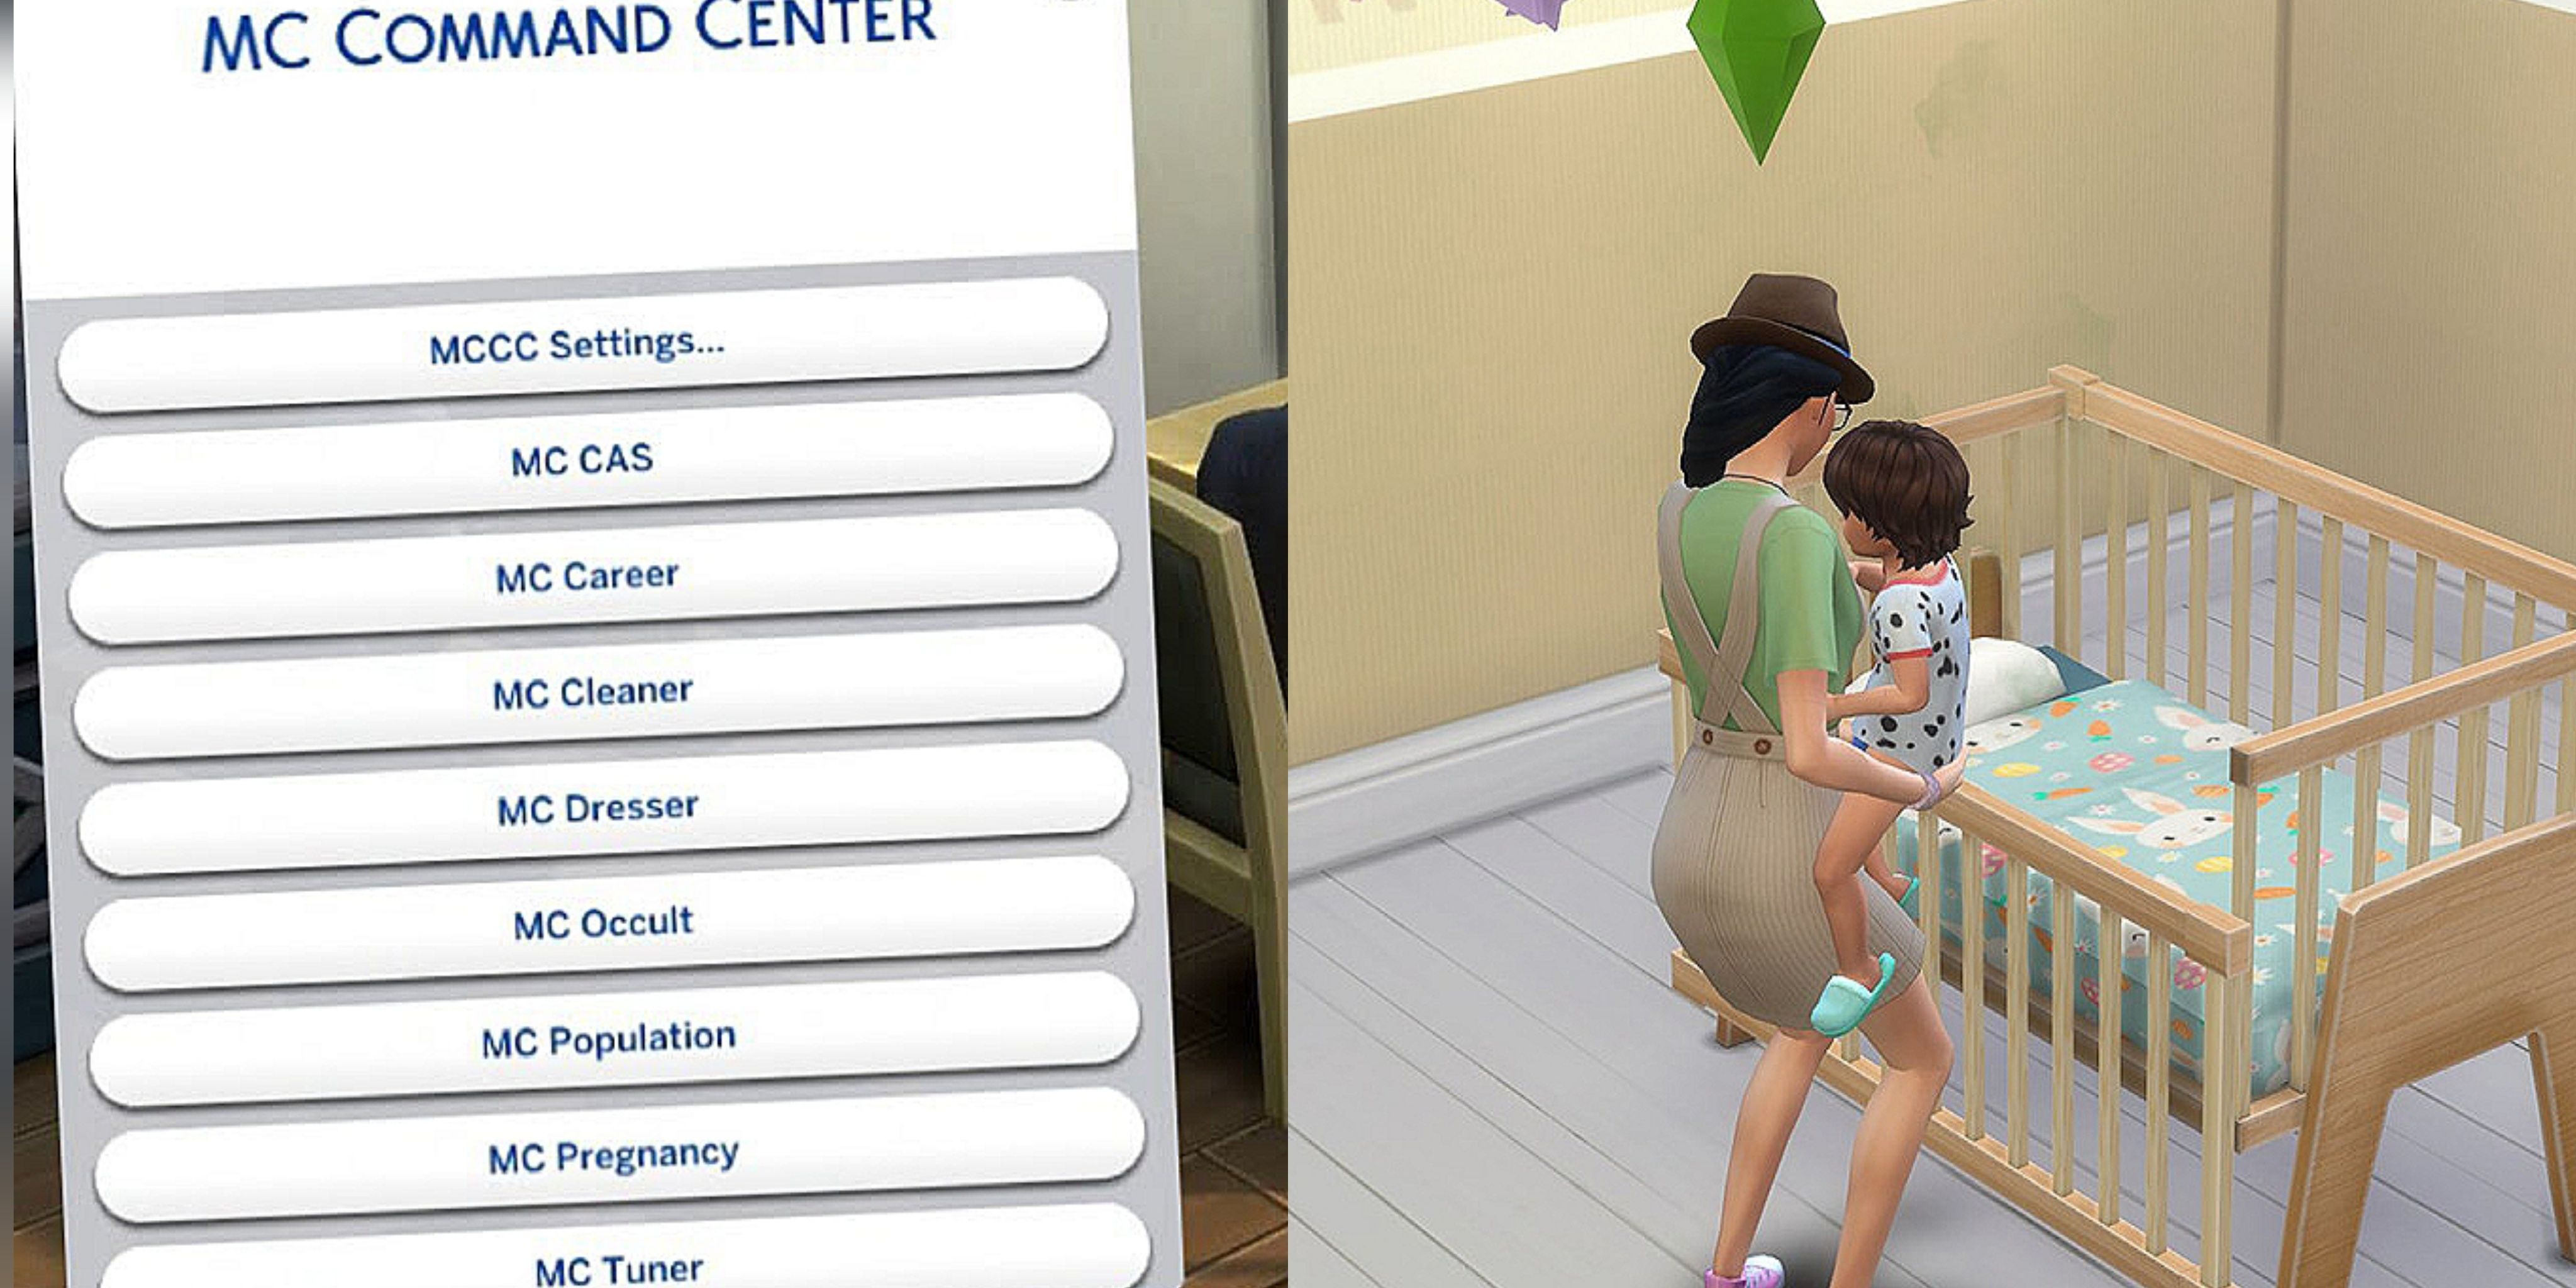 The Sims 4: Split Feature Image of adult putting toddler into crib & MC Command centre 